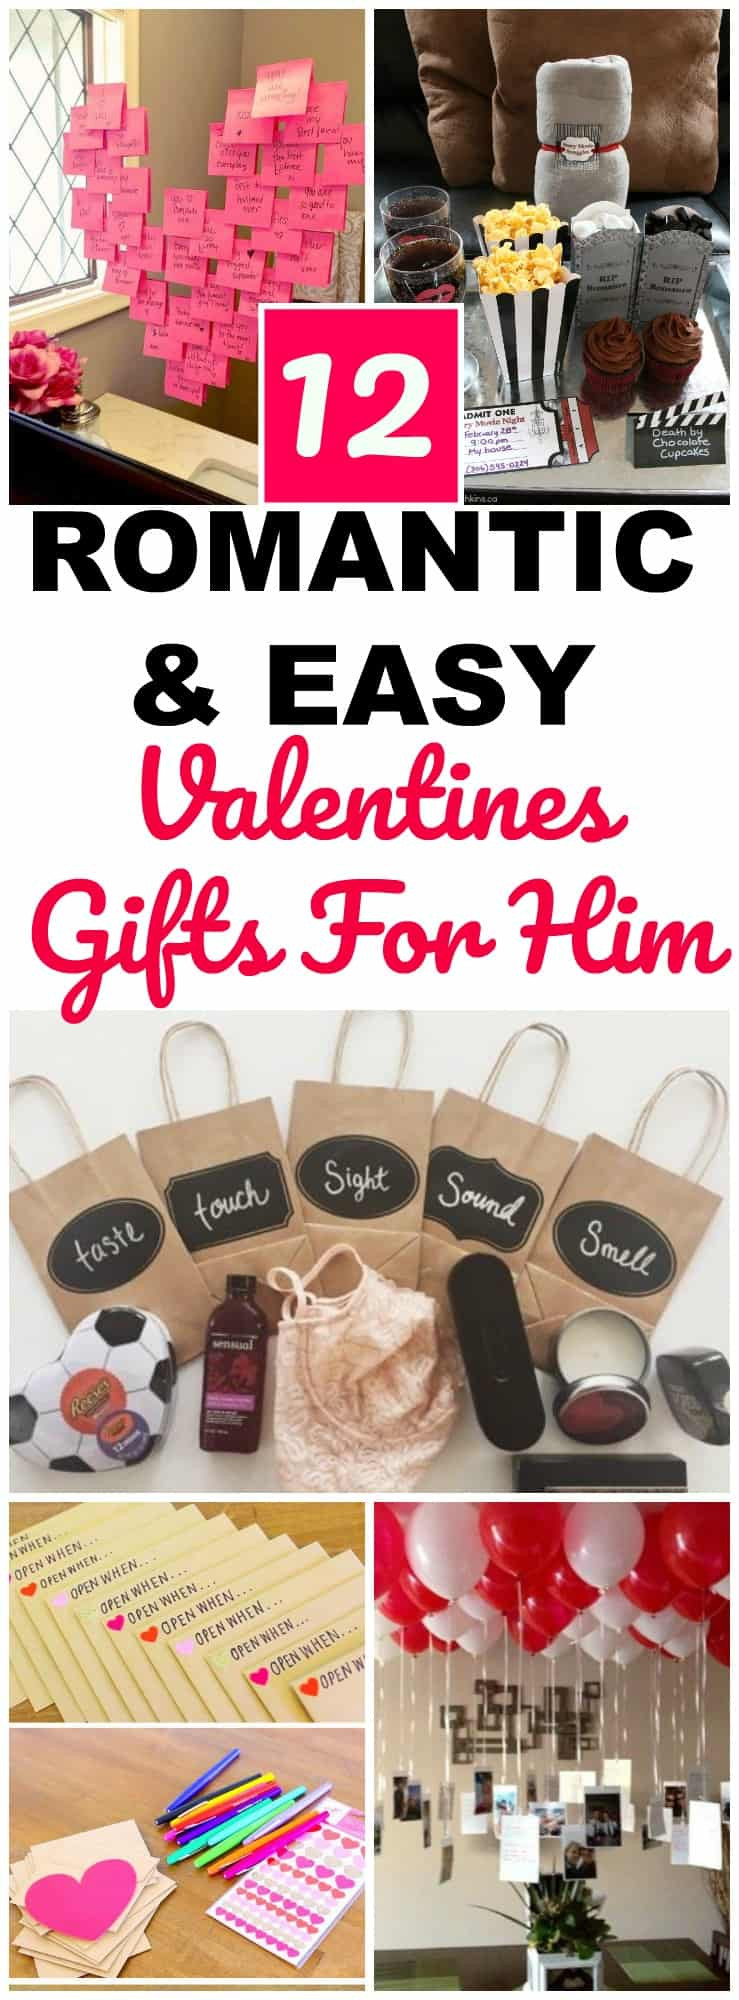 Valentines Gift Ideas For Daughter
 valentines easy ts for him Hairs Out of Place